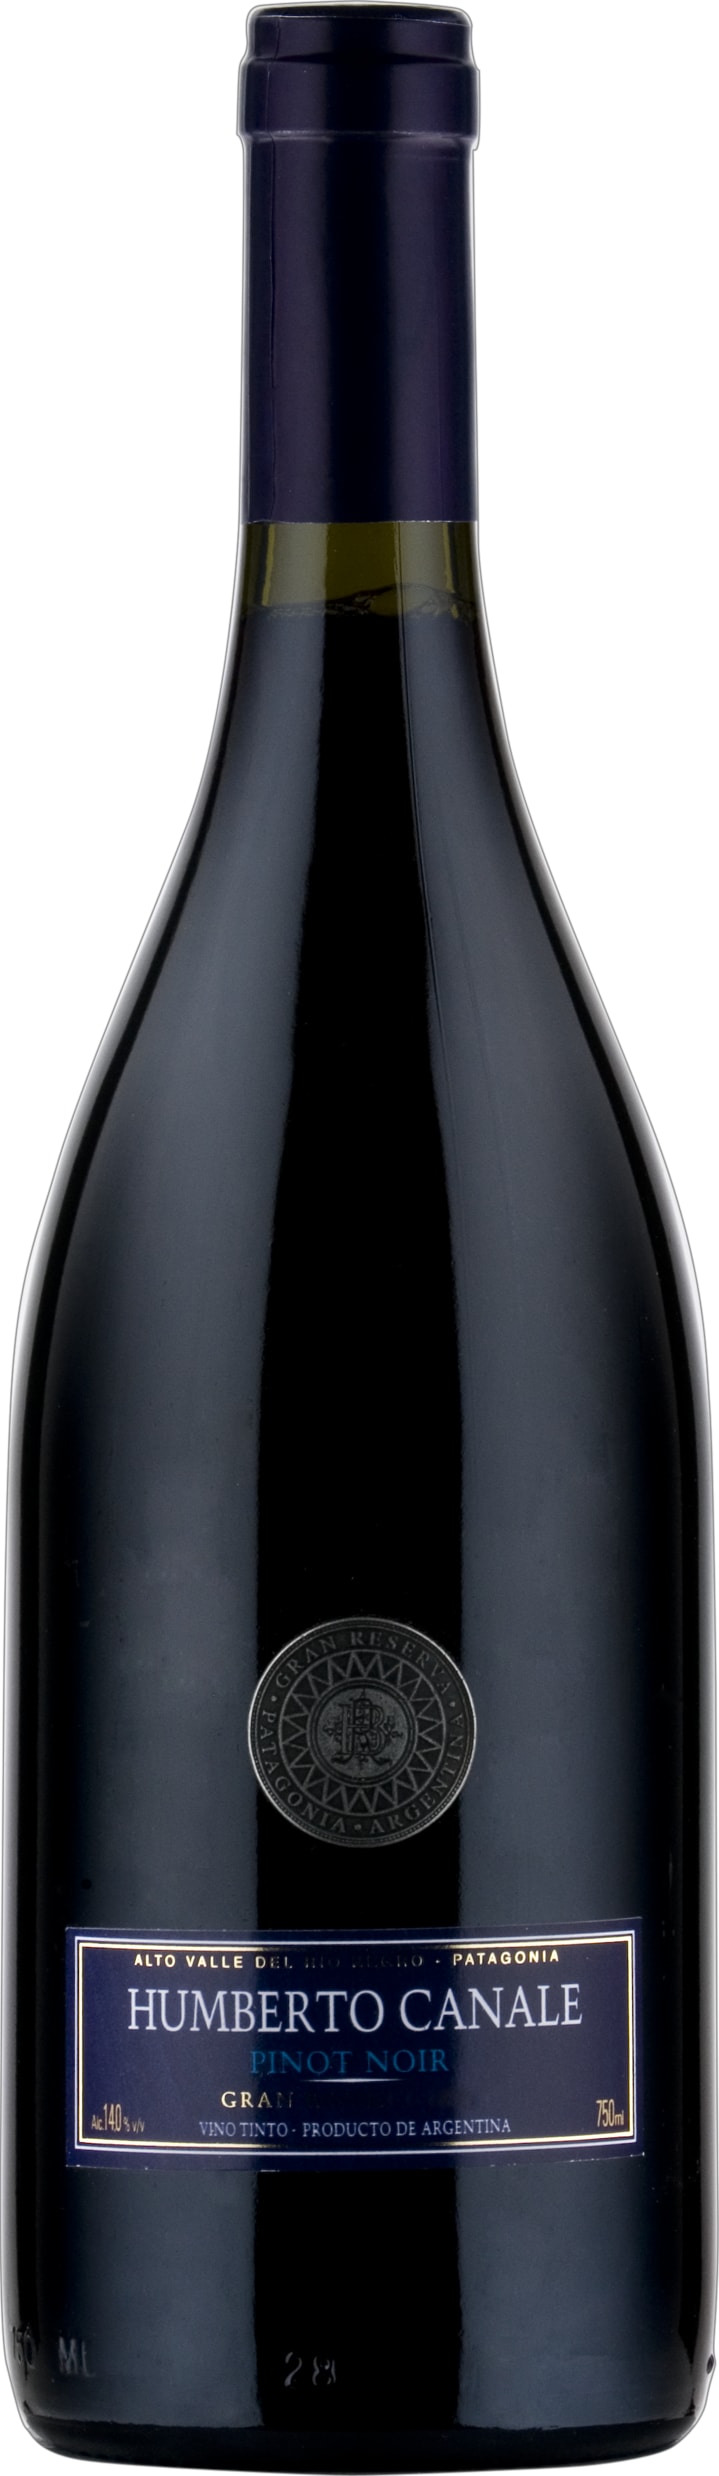 SelFam Pinot Noir 21 Humberto Canale 75cl - Buy Humberto Canale Wines from GREAT WINES DIRECT wine shop